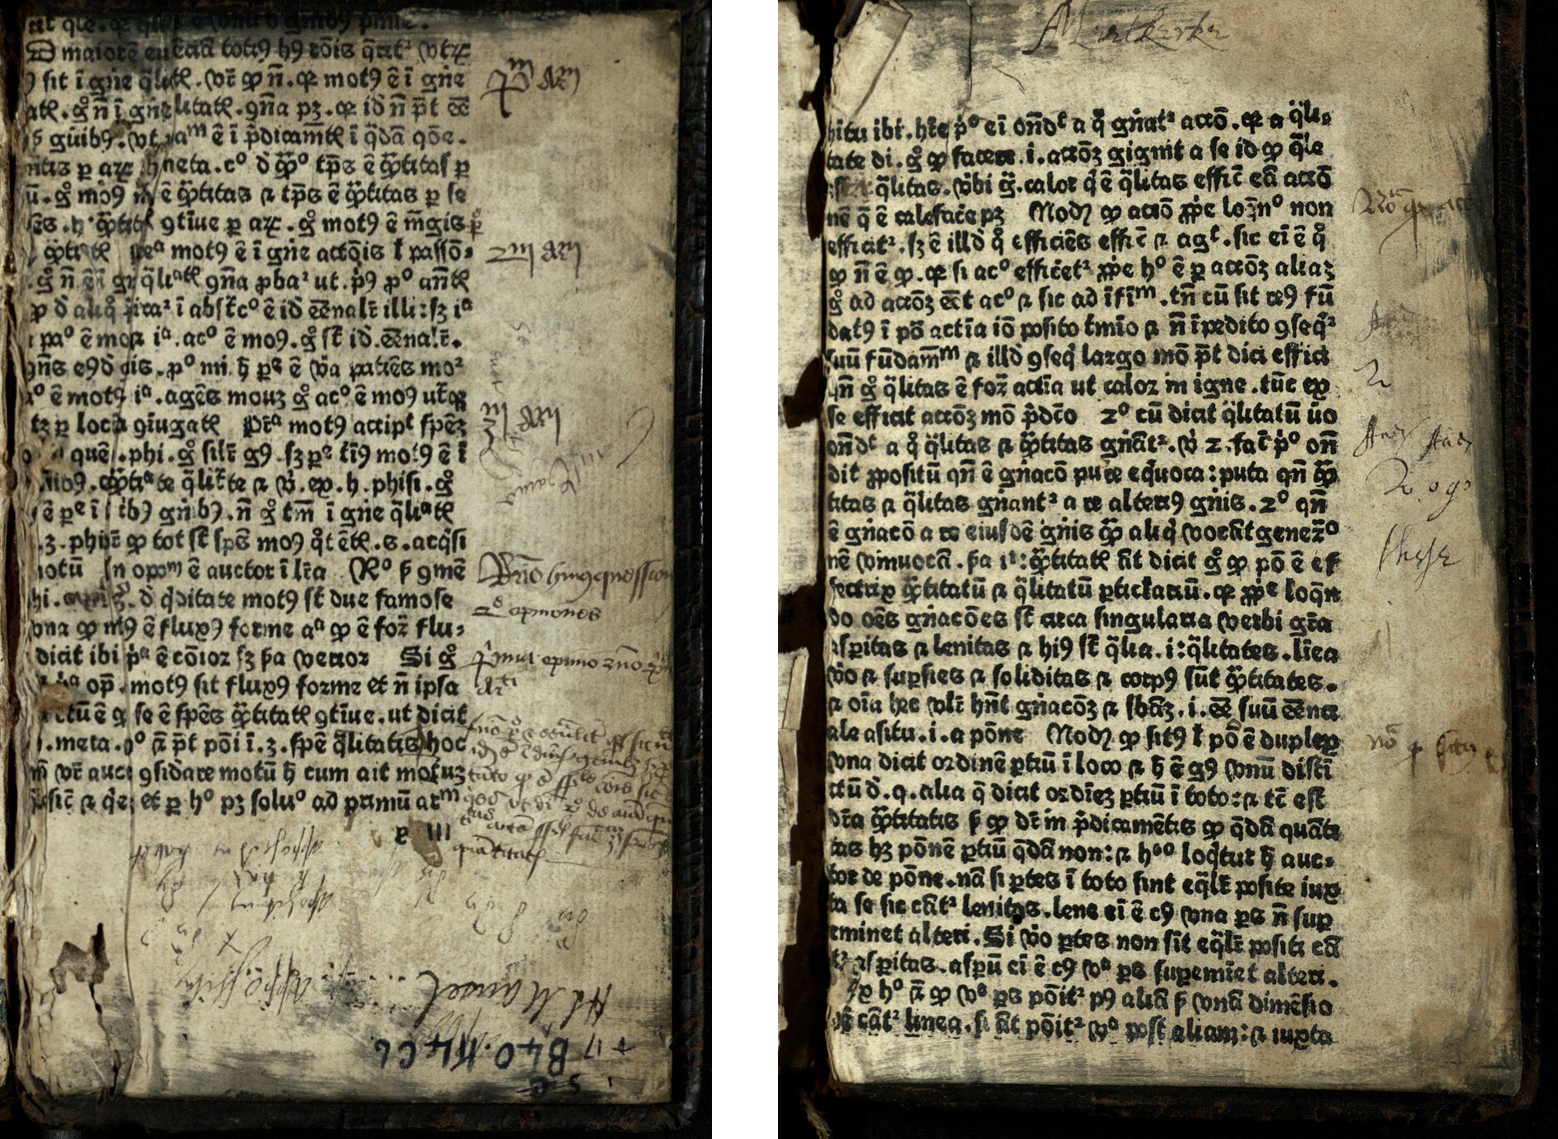 Leaves y3r (left) and y5r (right) from the St Andrews copy